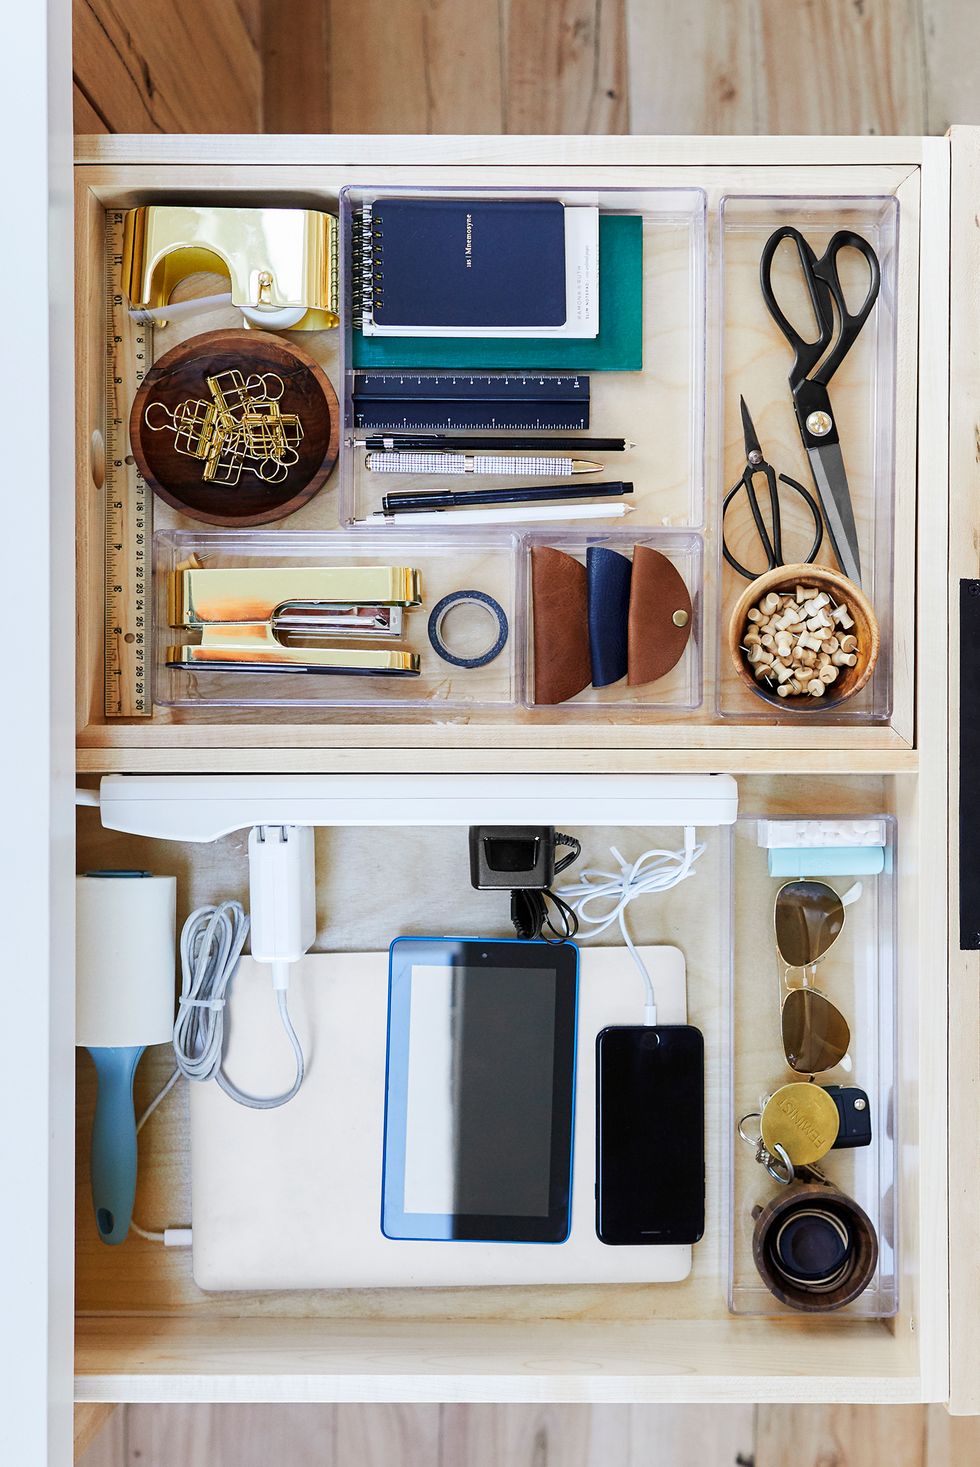 Two People, One Tiny Closet - A Small Space Storage Agony with 5 Problems &  5 Clever Solutions - Emily Henderson